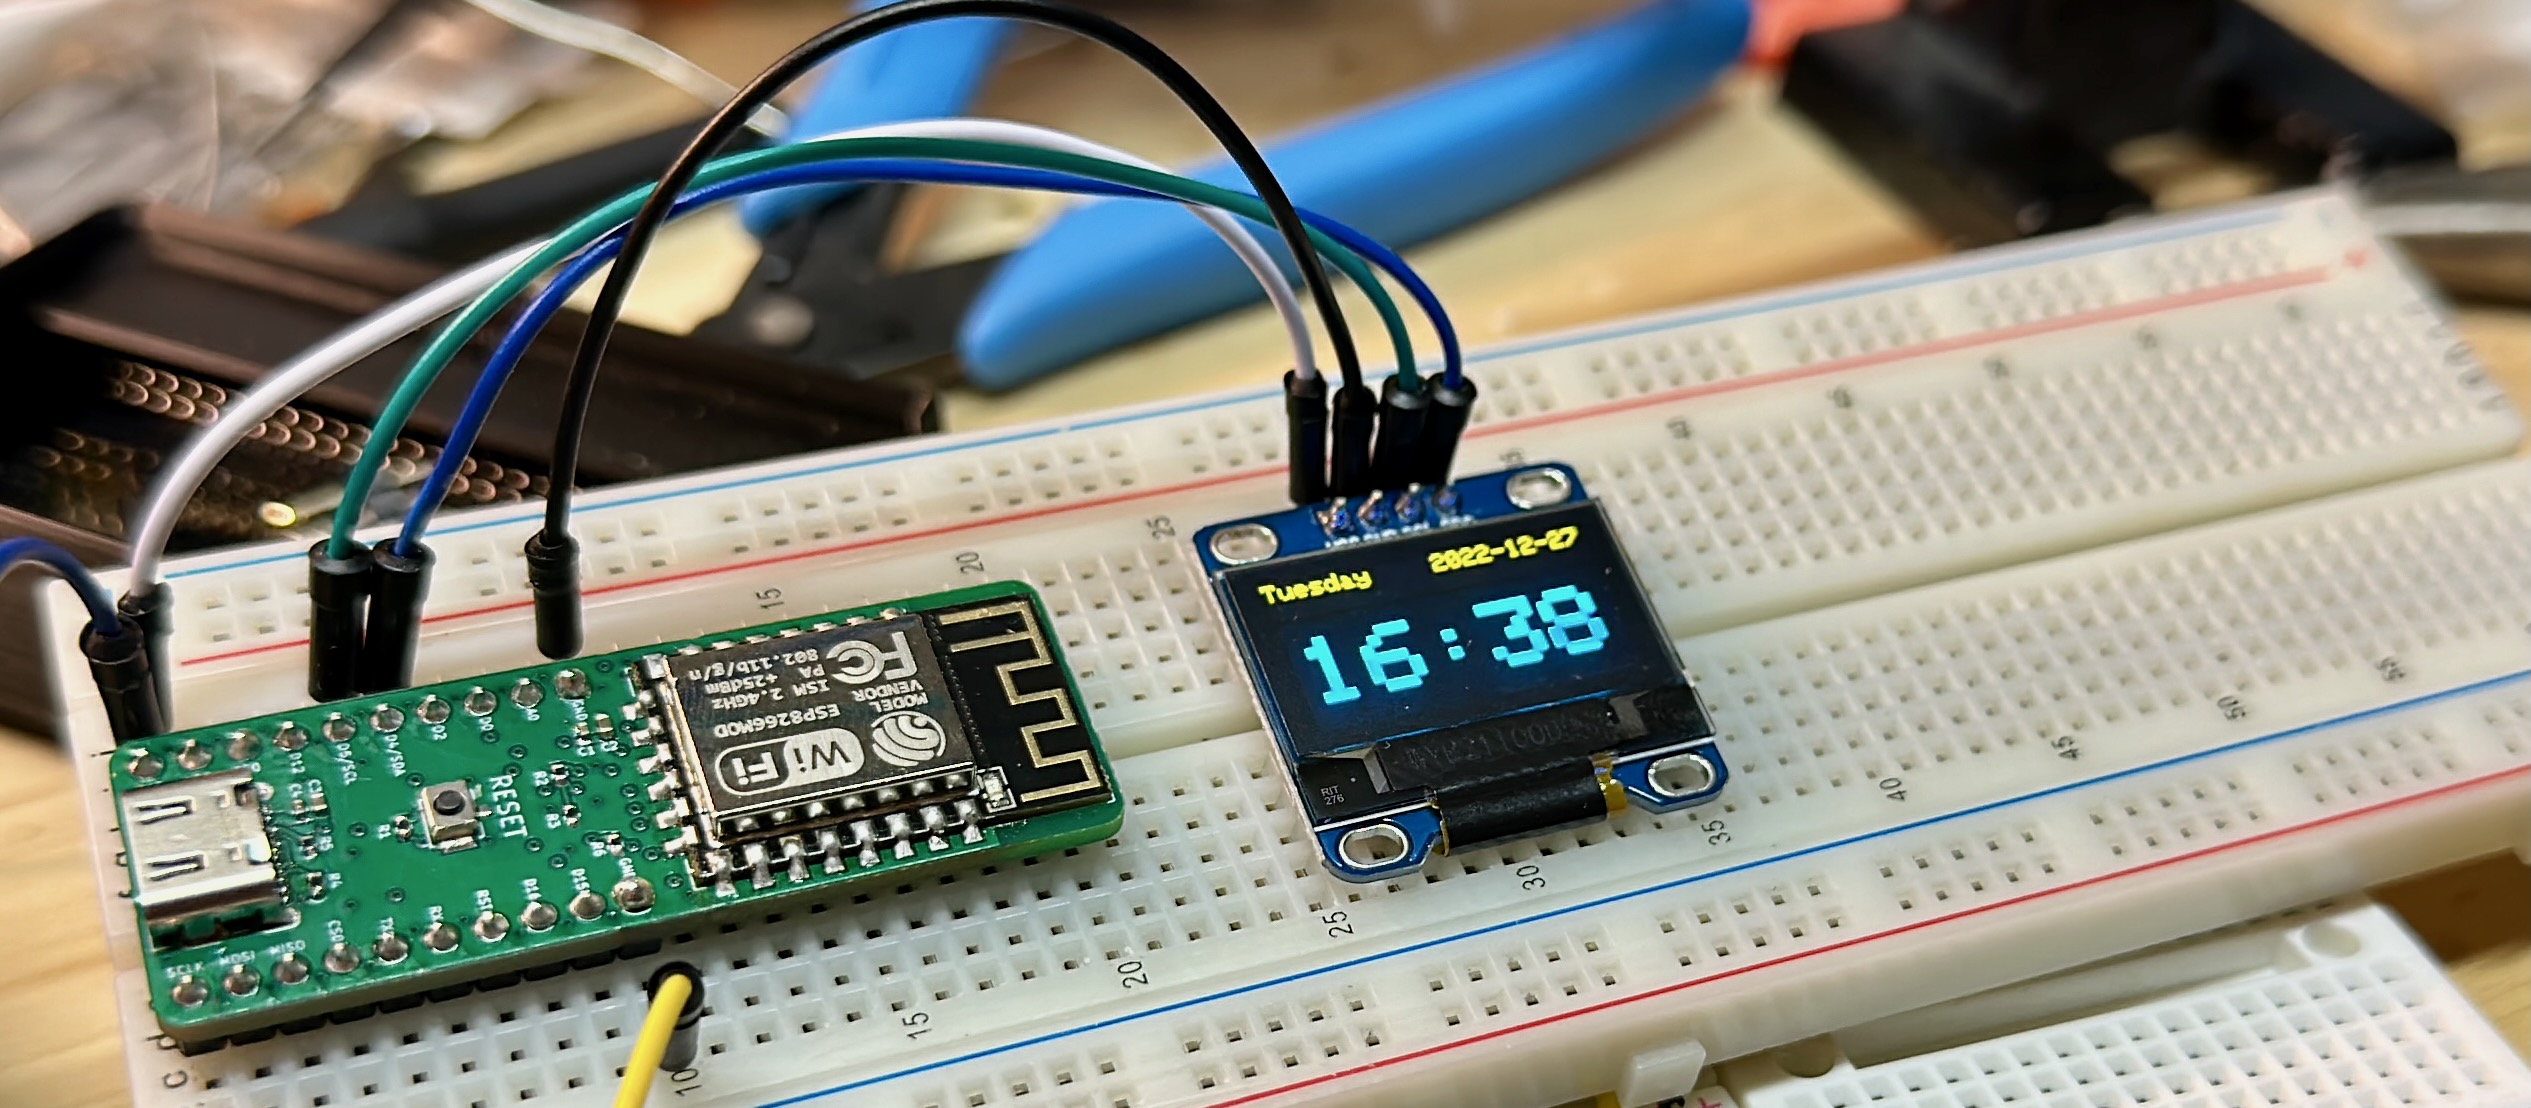 An assembled board running an OLED screen showing the date/time